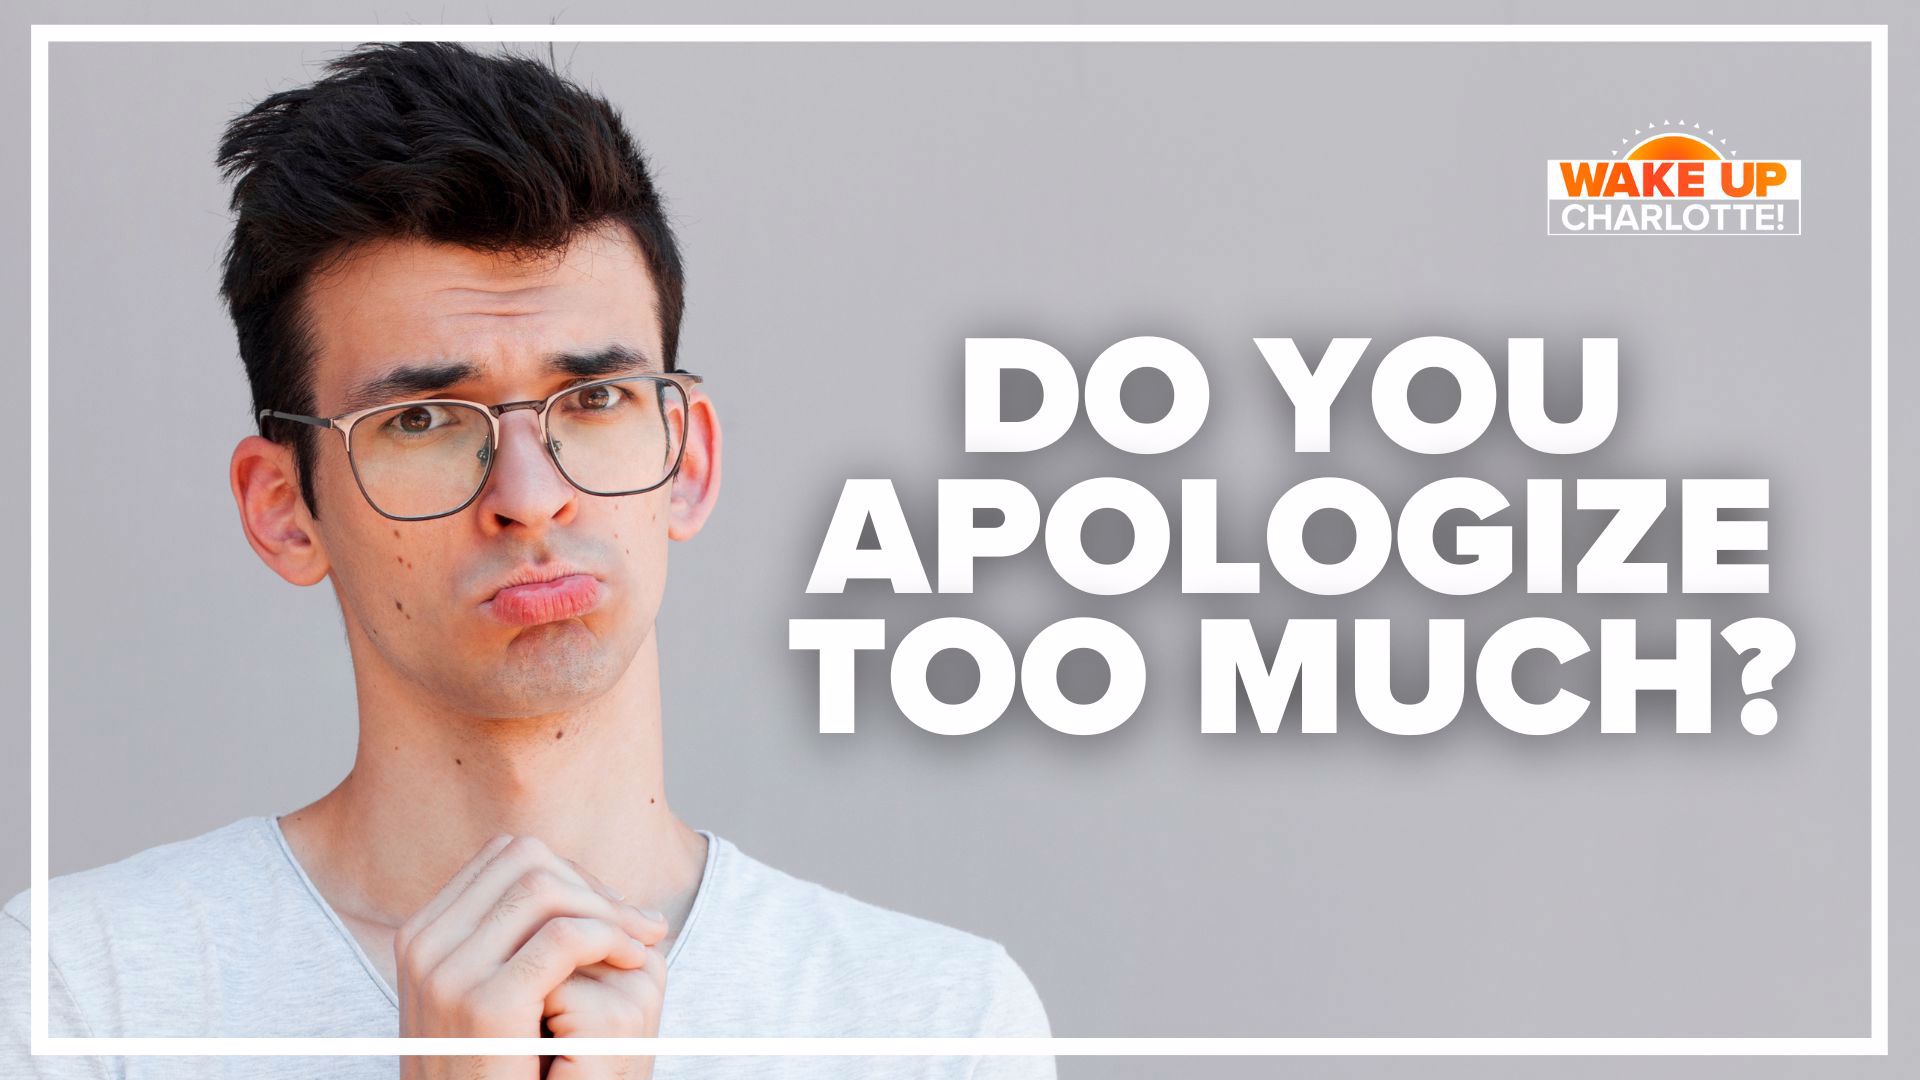 Are you apologizing too much? A new survey revealed that many people think men actually aren't apologizing enough.